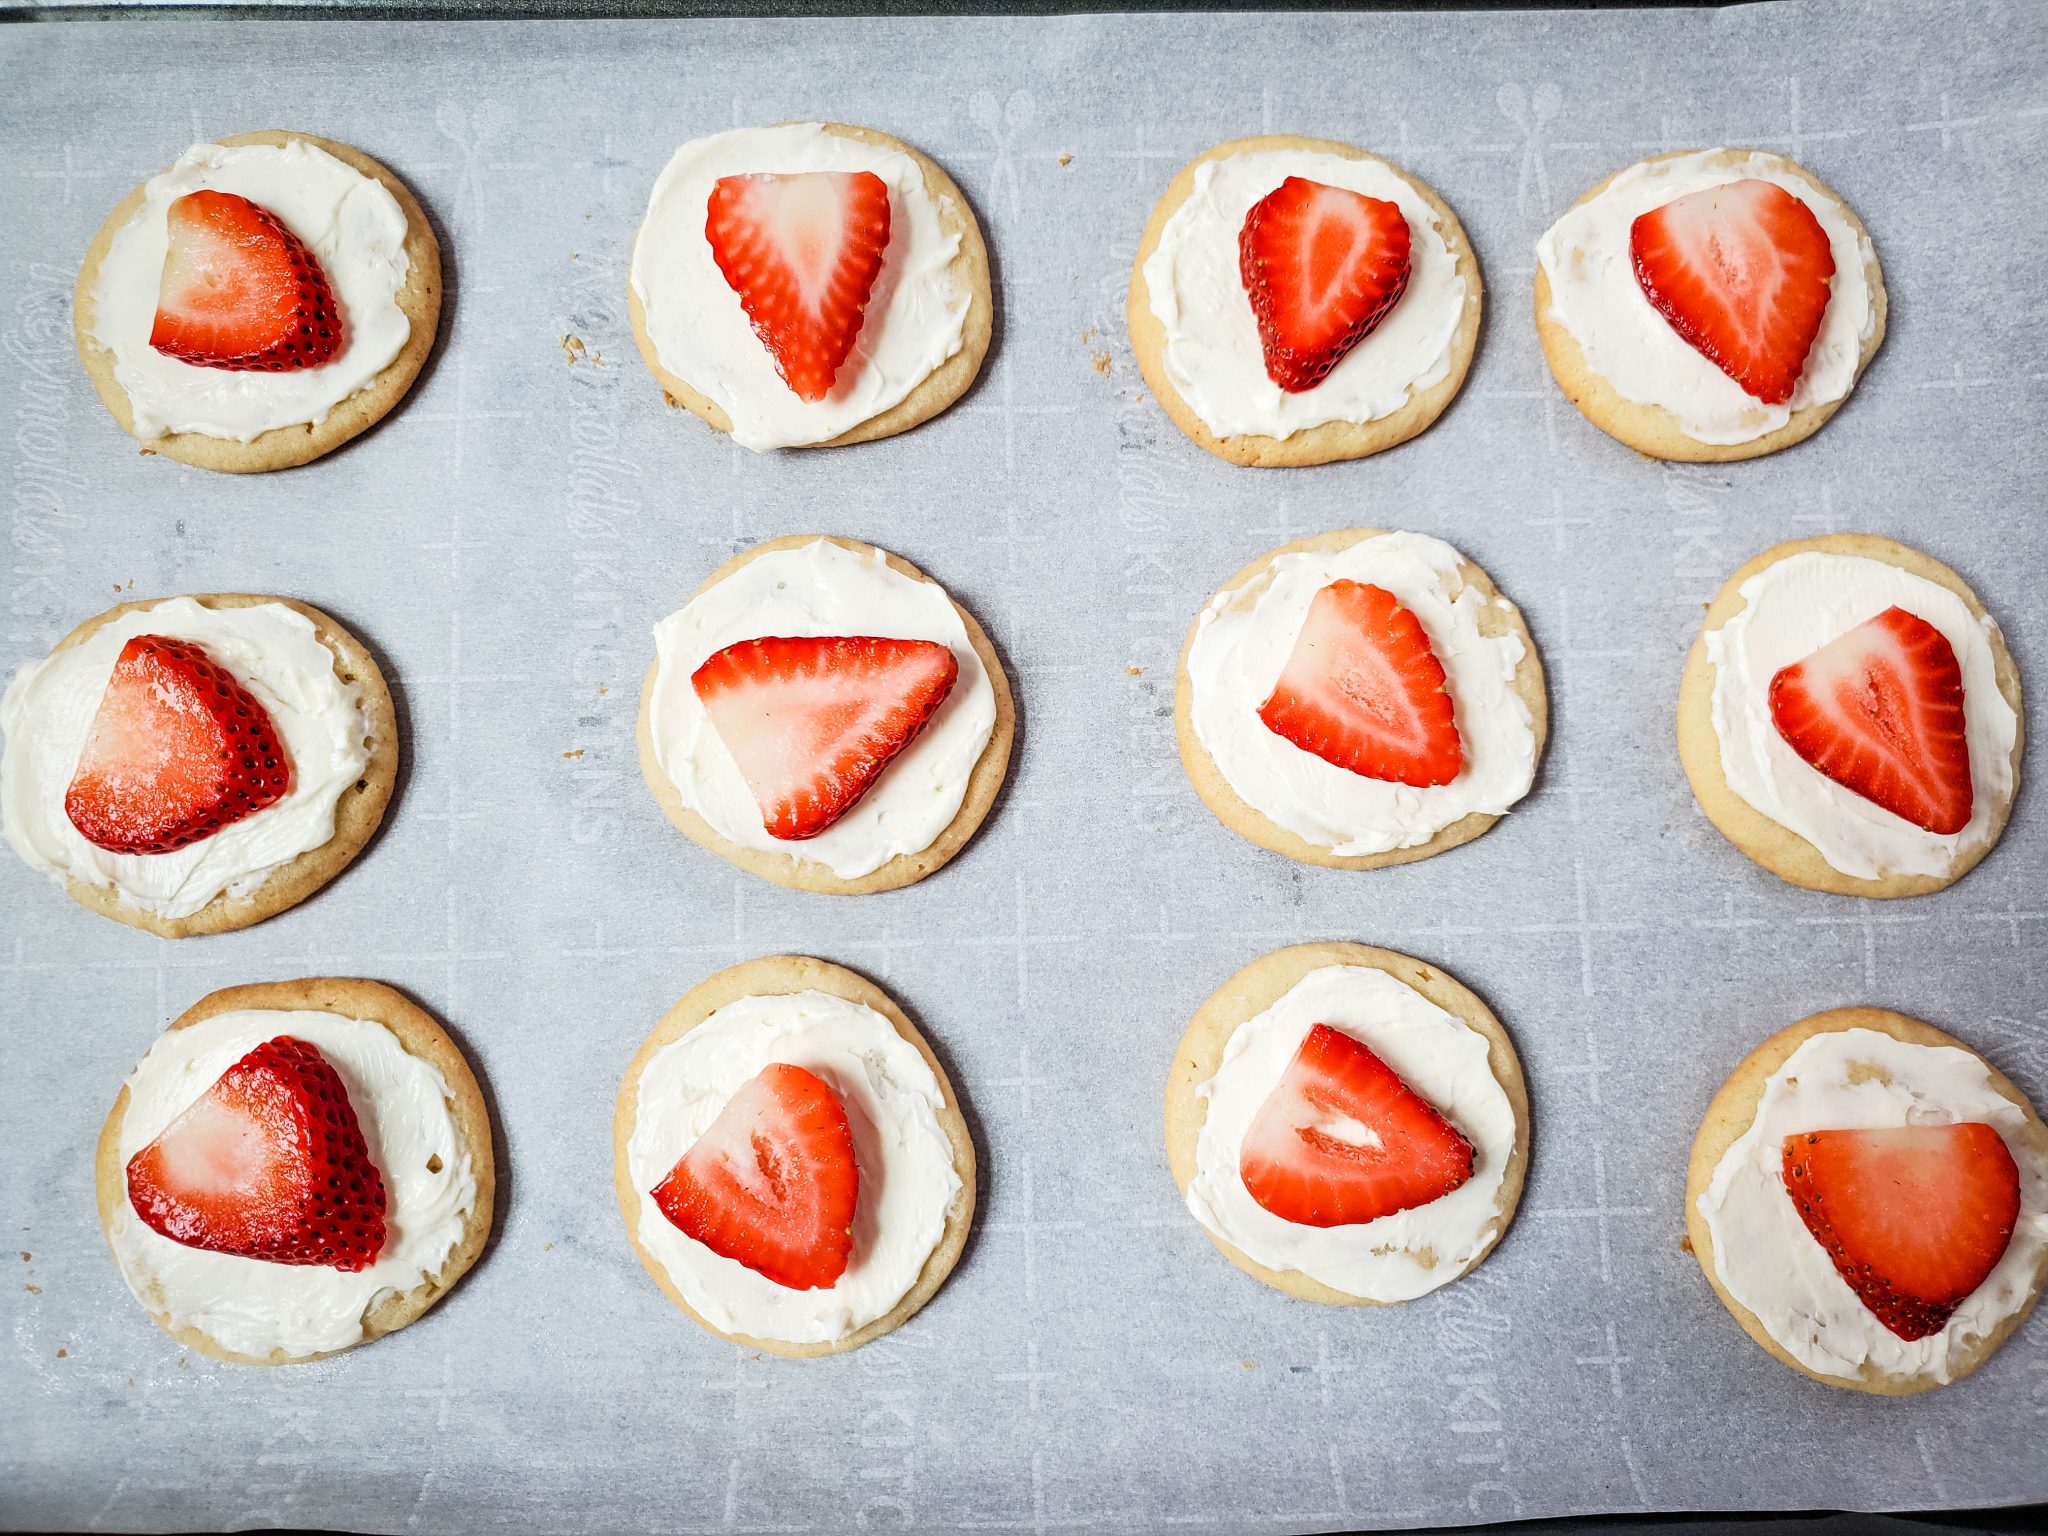 Sugar Cookies Iced with Cream Cheese Frosting and Toped with a Strawberry Slice